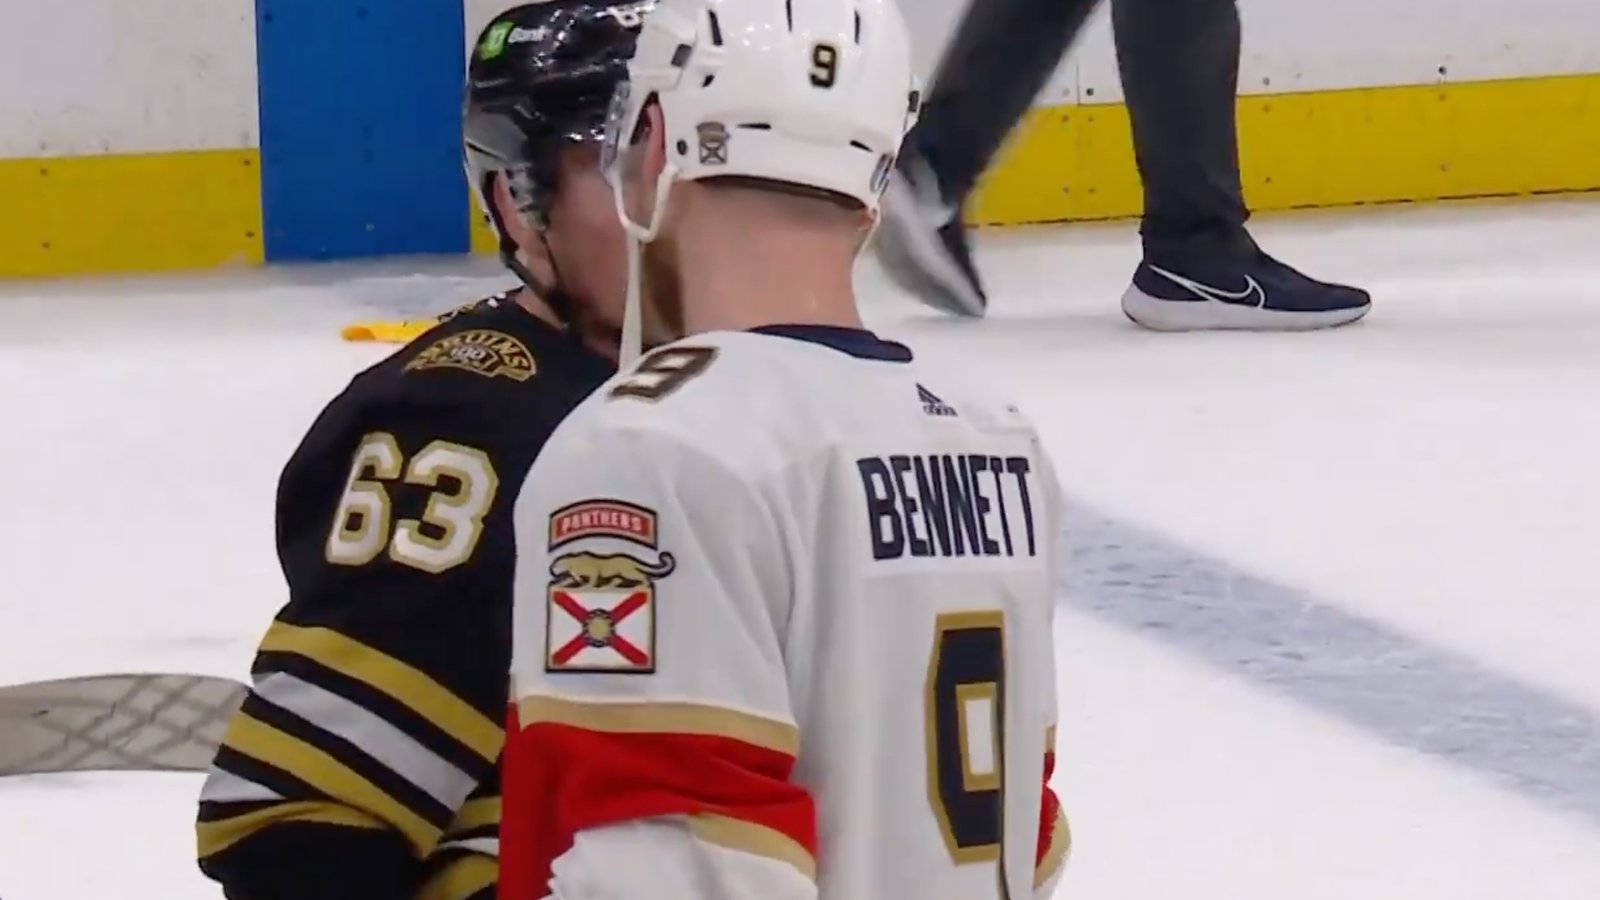 Brad Marchand has a word with Sam Bennett in handshake line